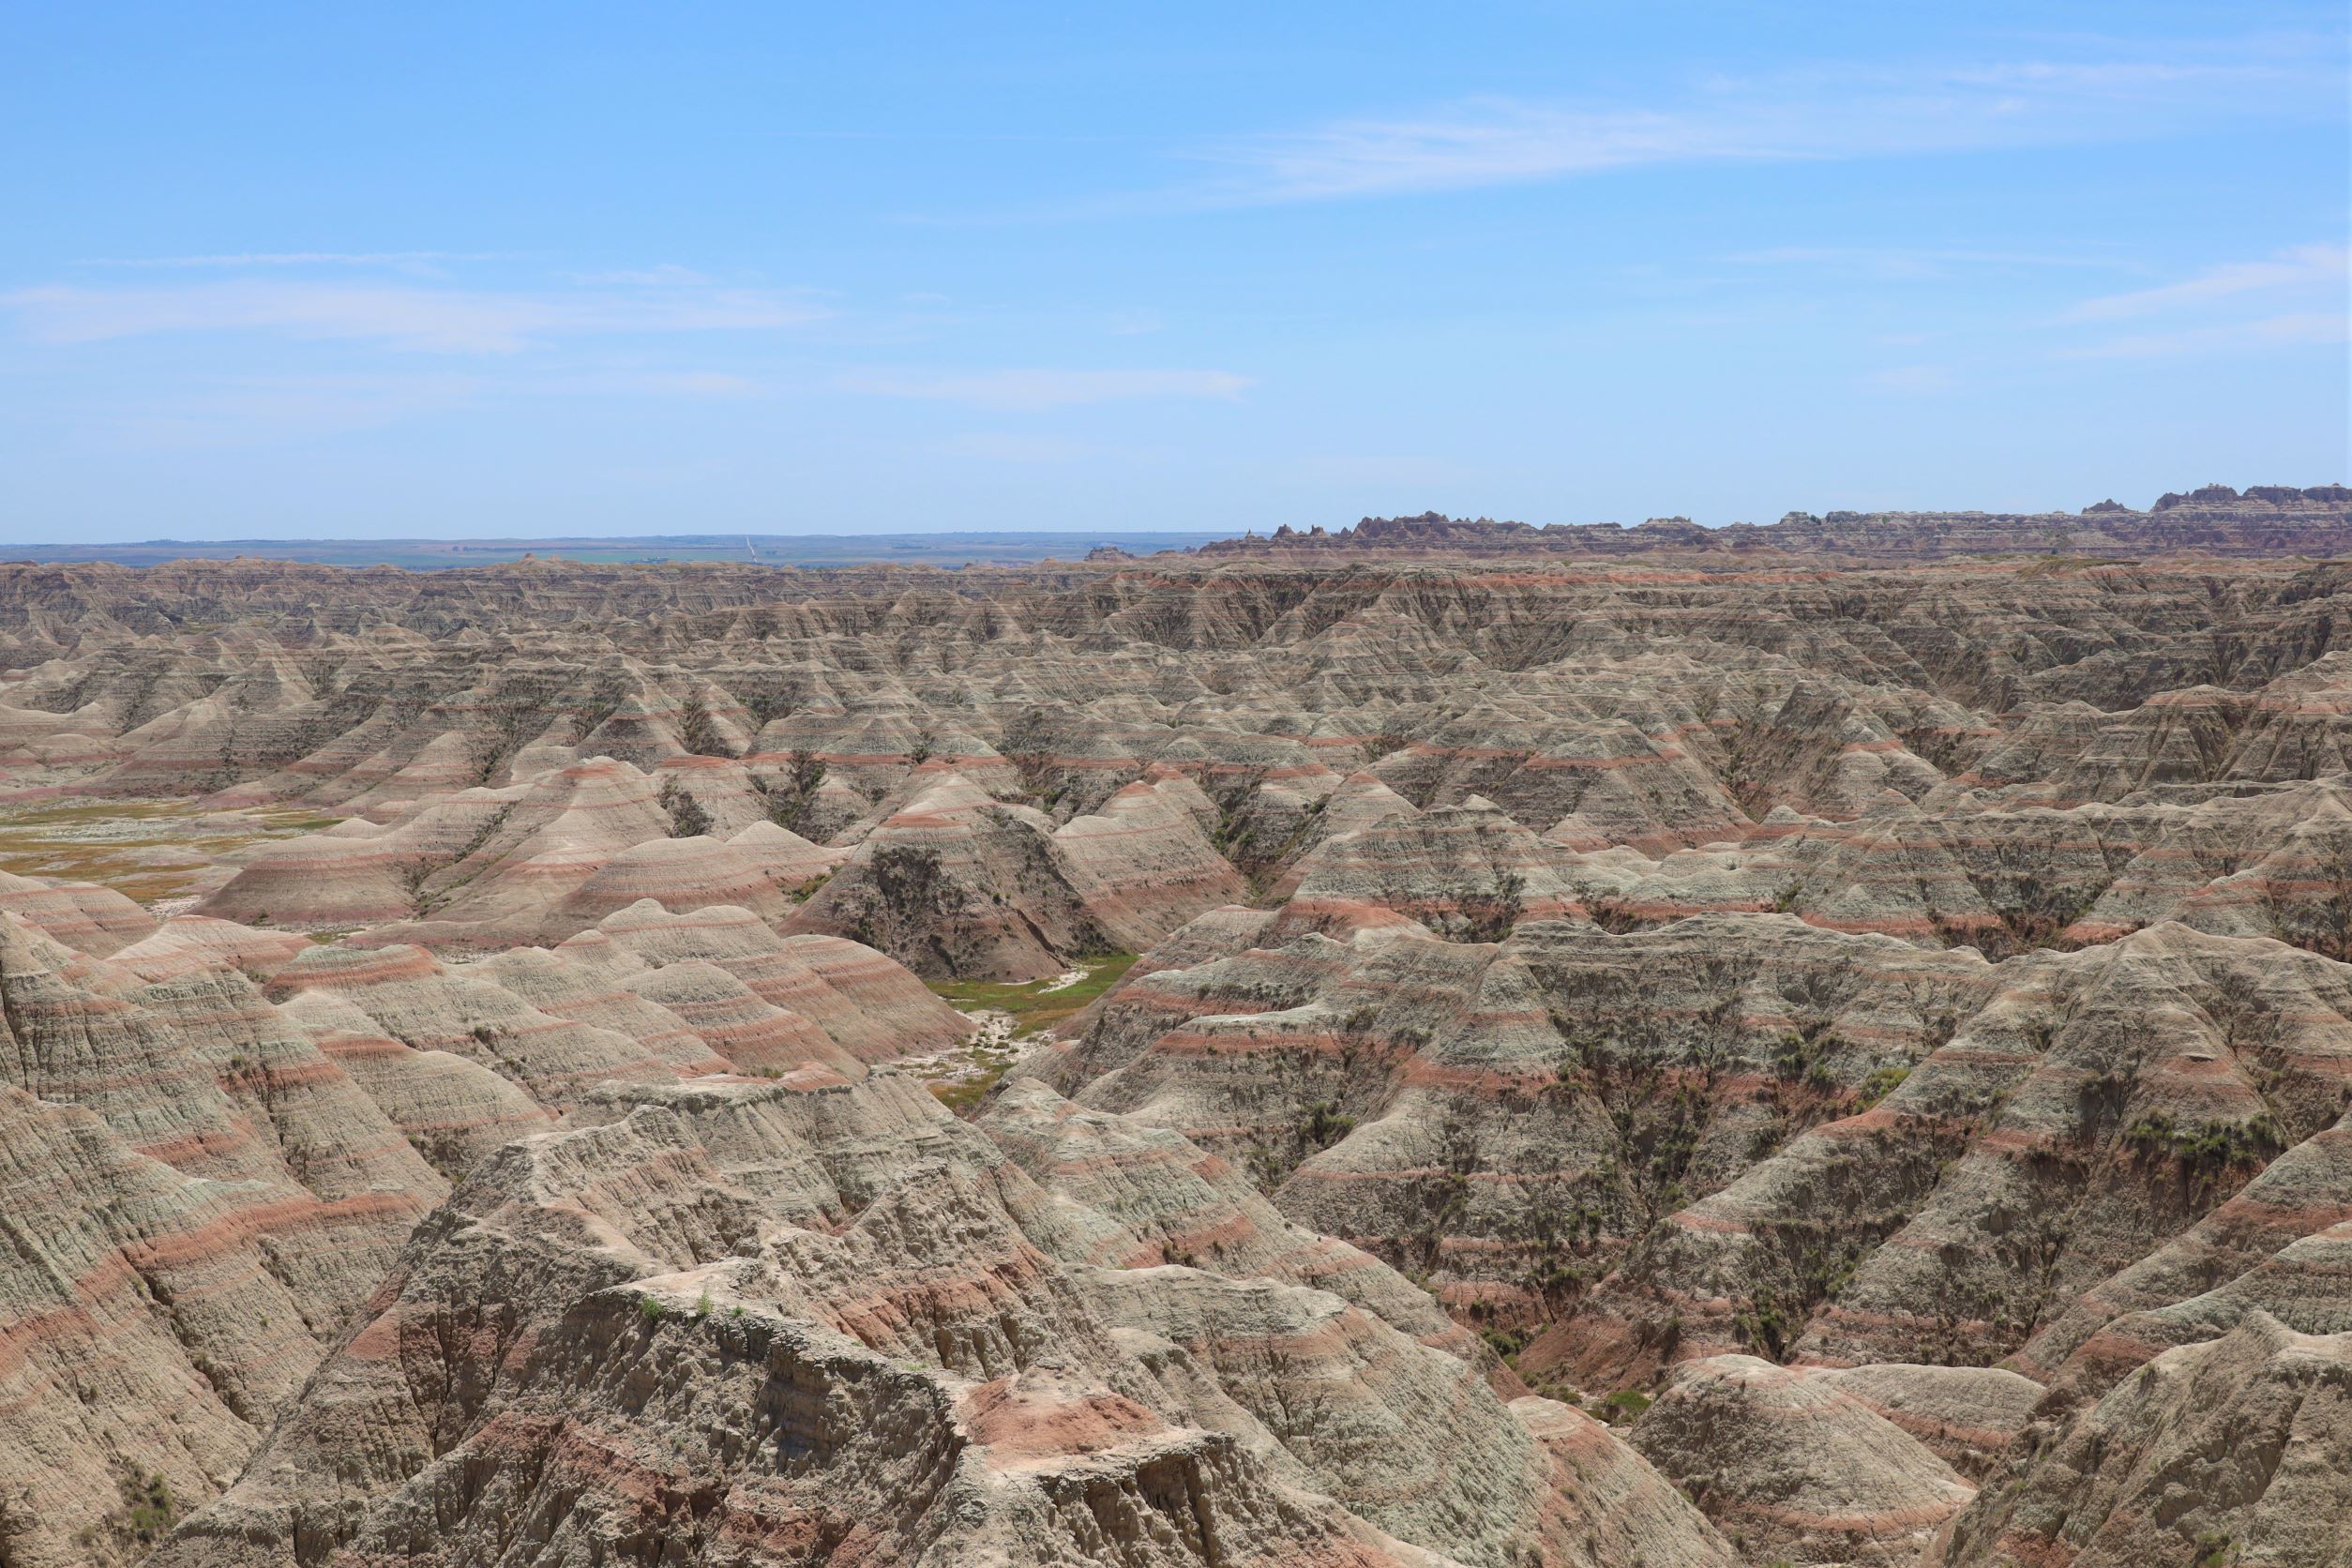 A Photo Tour of the Beautiful Badlands National Park